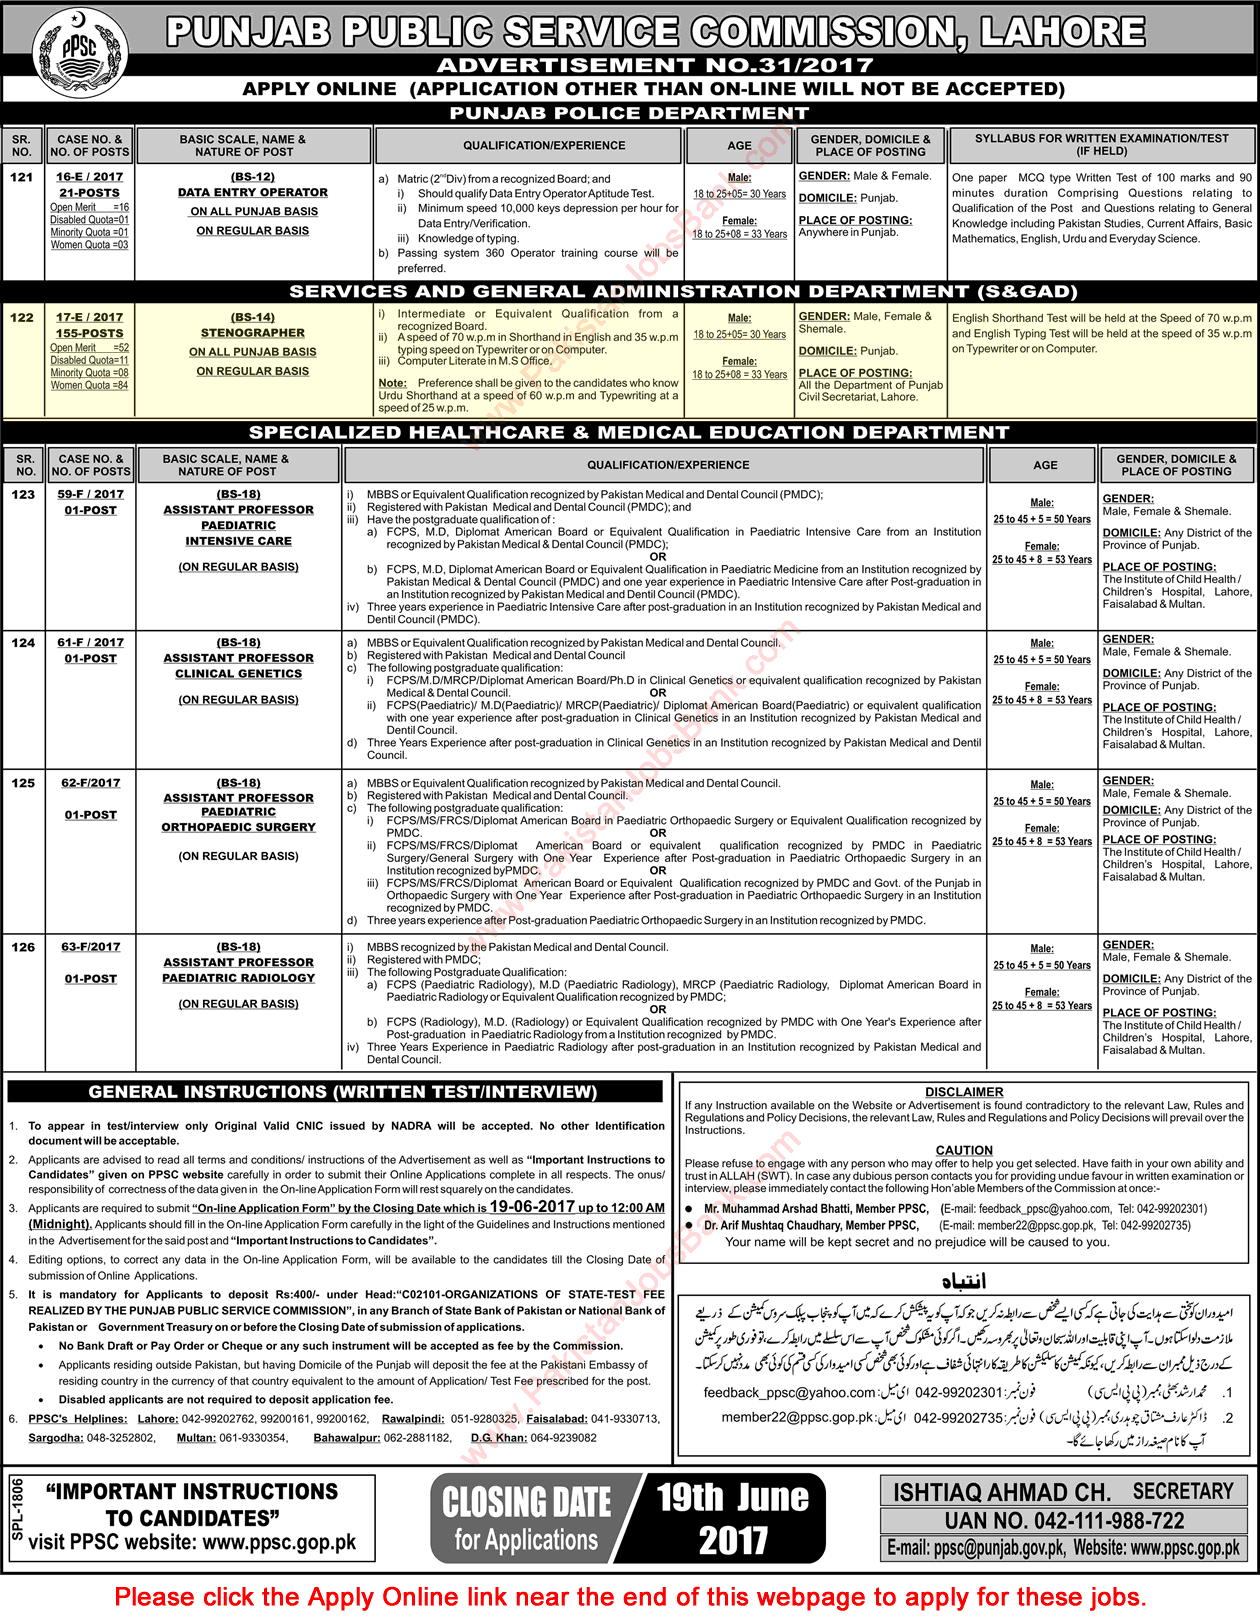 Stenographer Jobs in Services and General Administration Department Punjab June 2017 PPSC Apply Online Latest